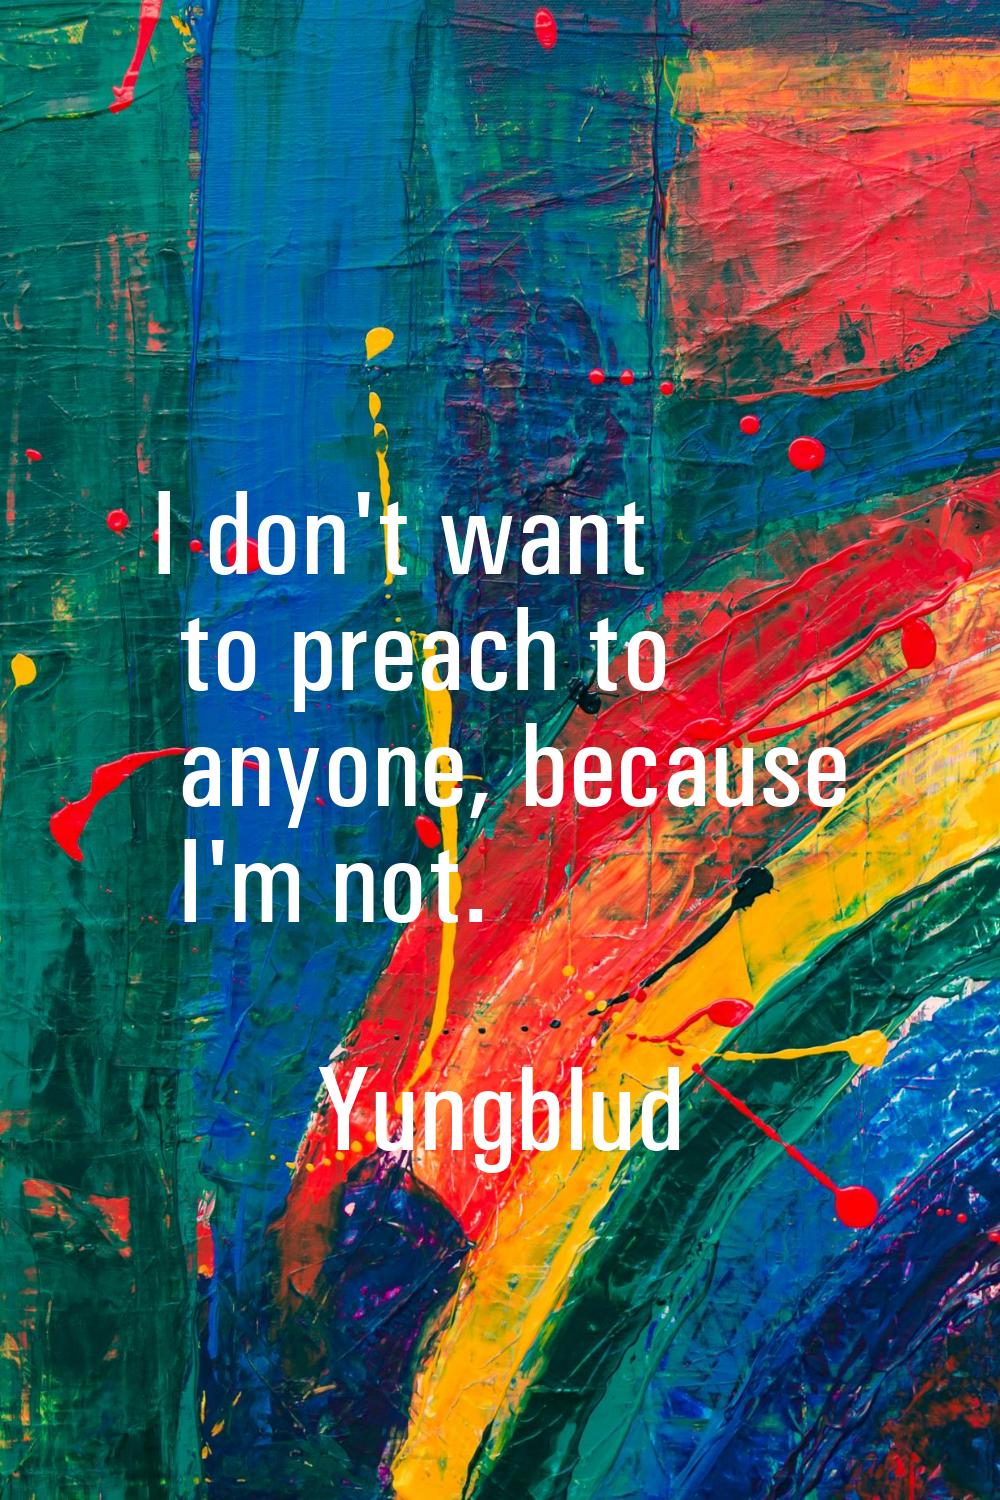 I don't want to preach to anyone, because I'm not.